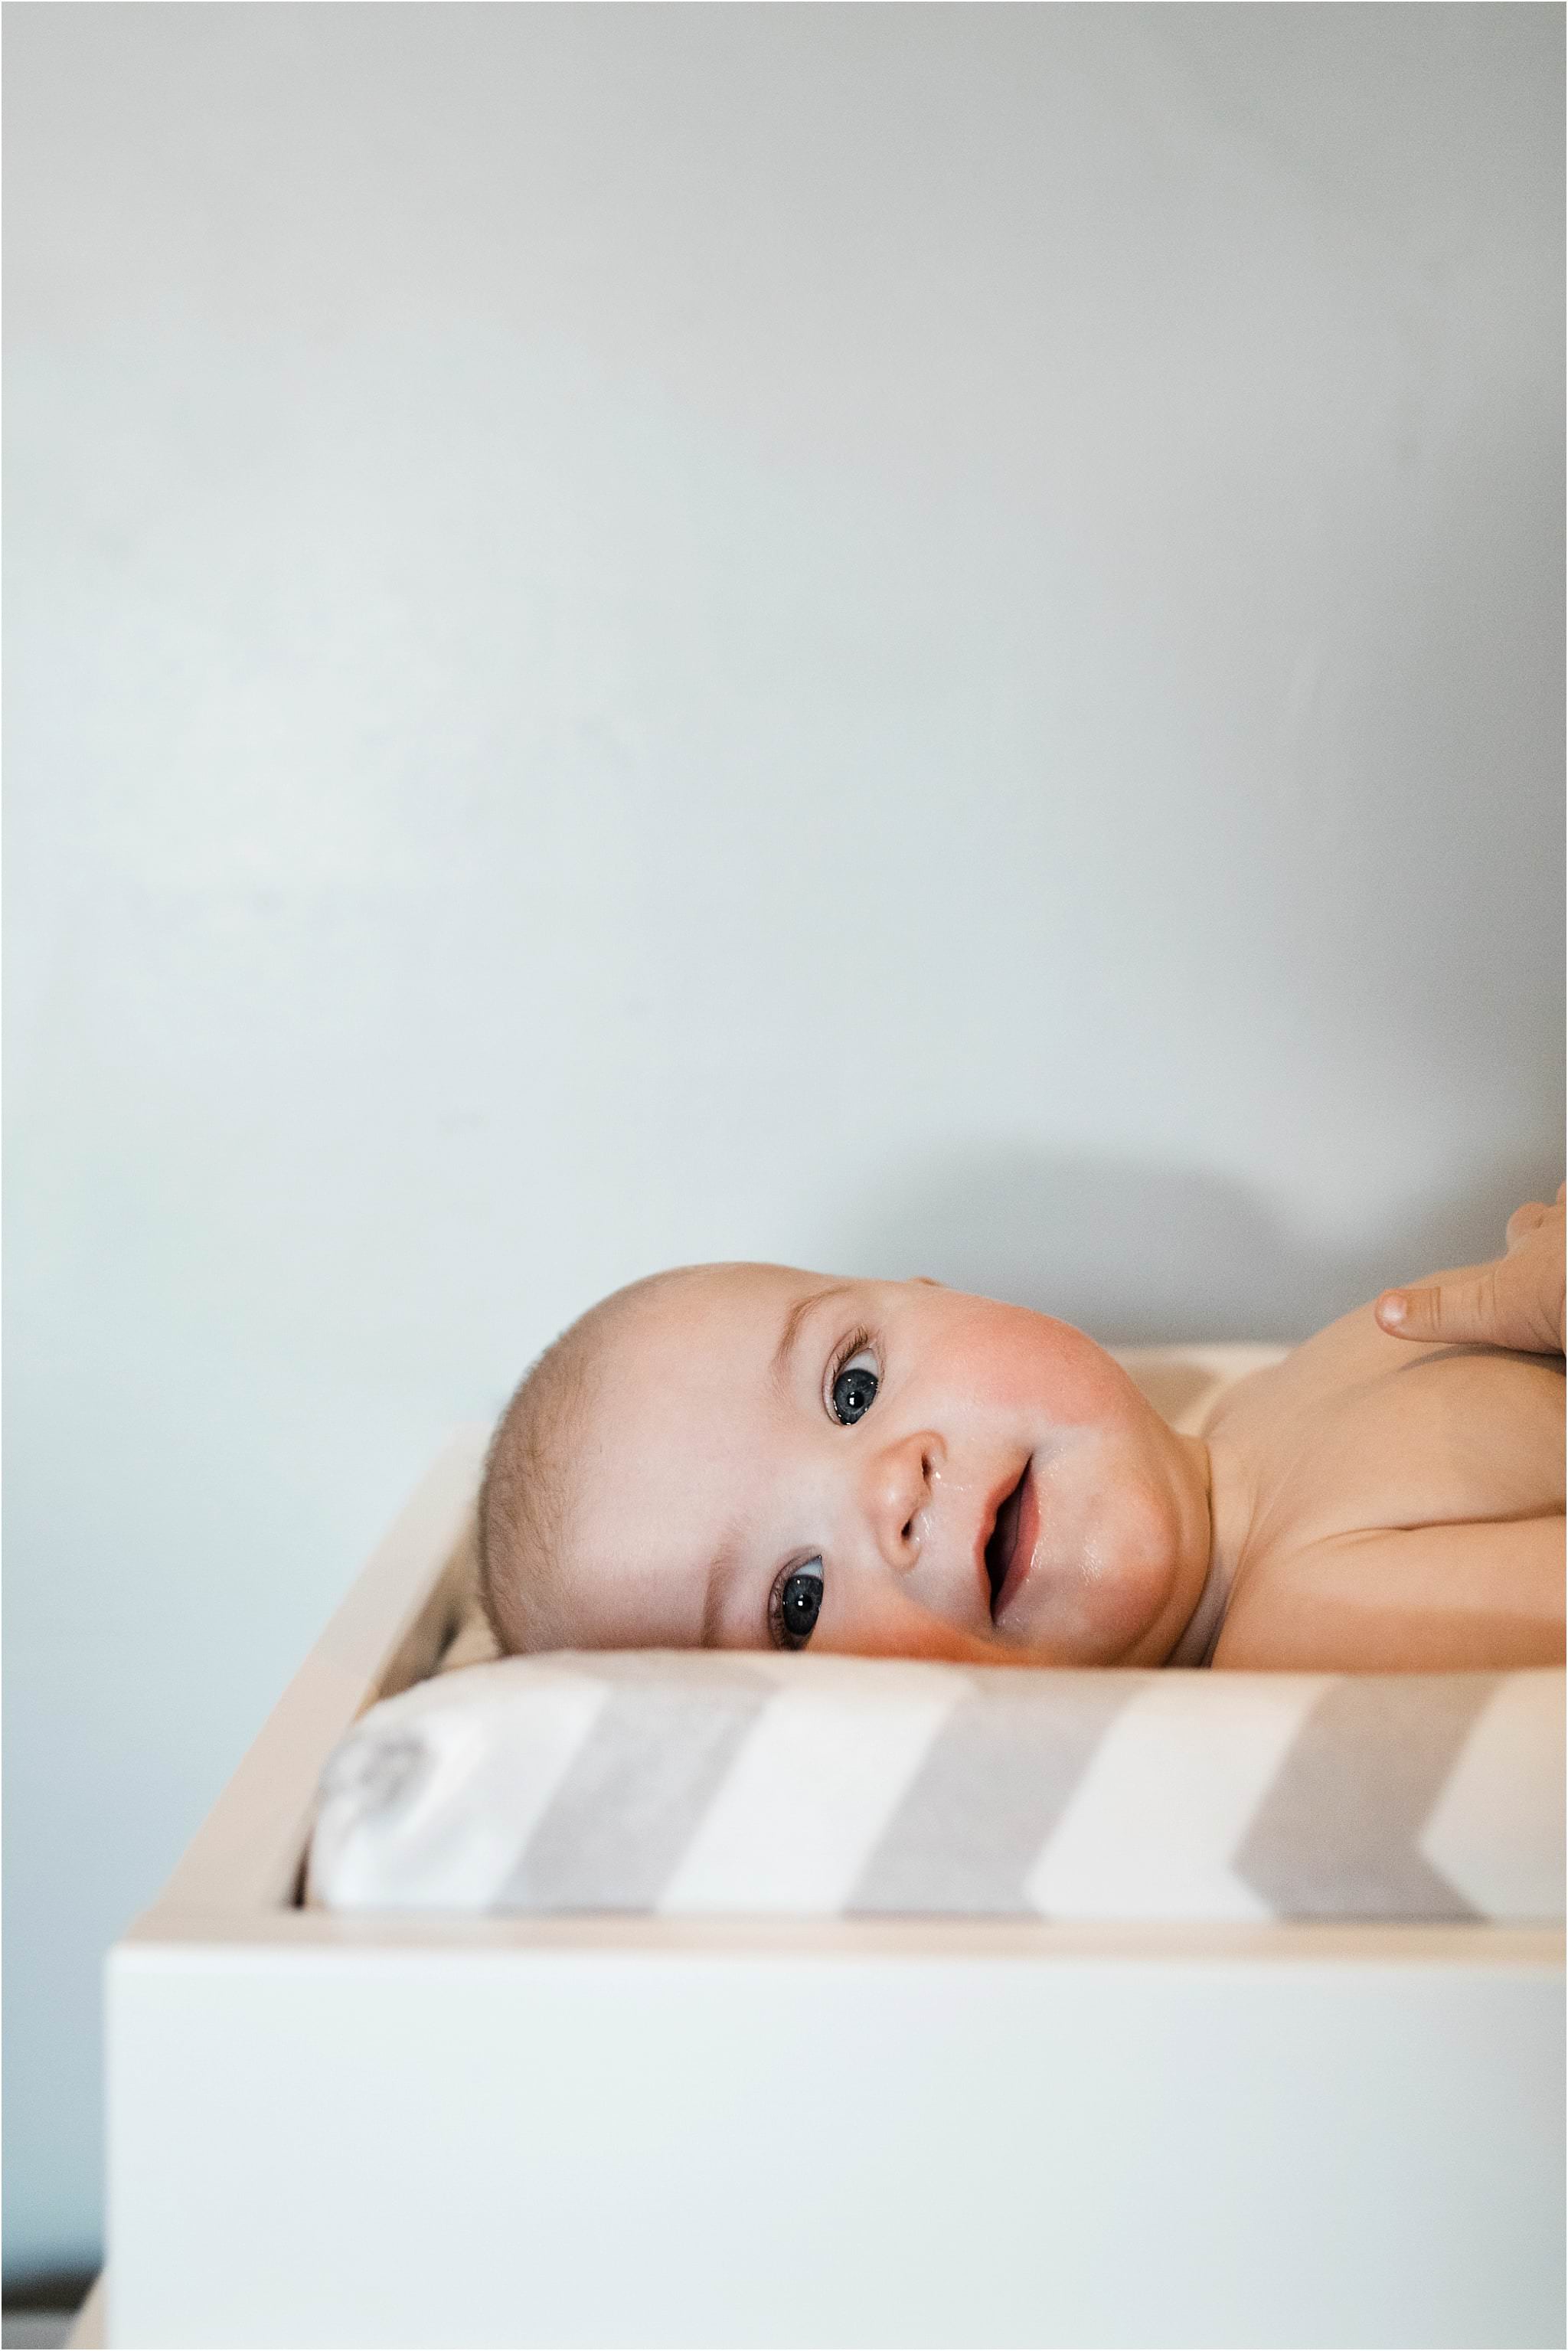 6 month old baby on changing table